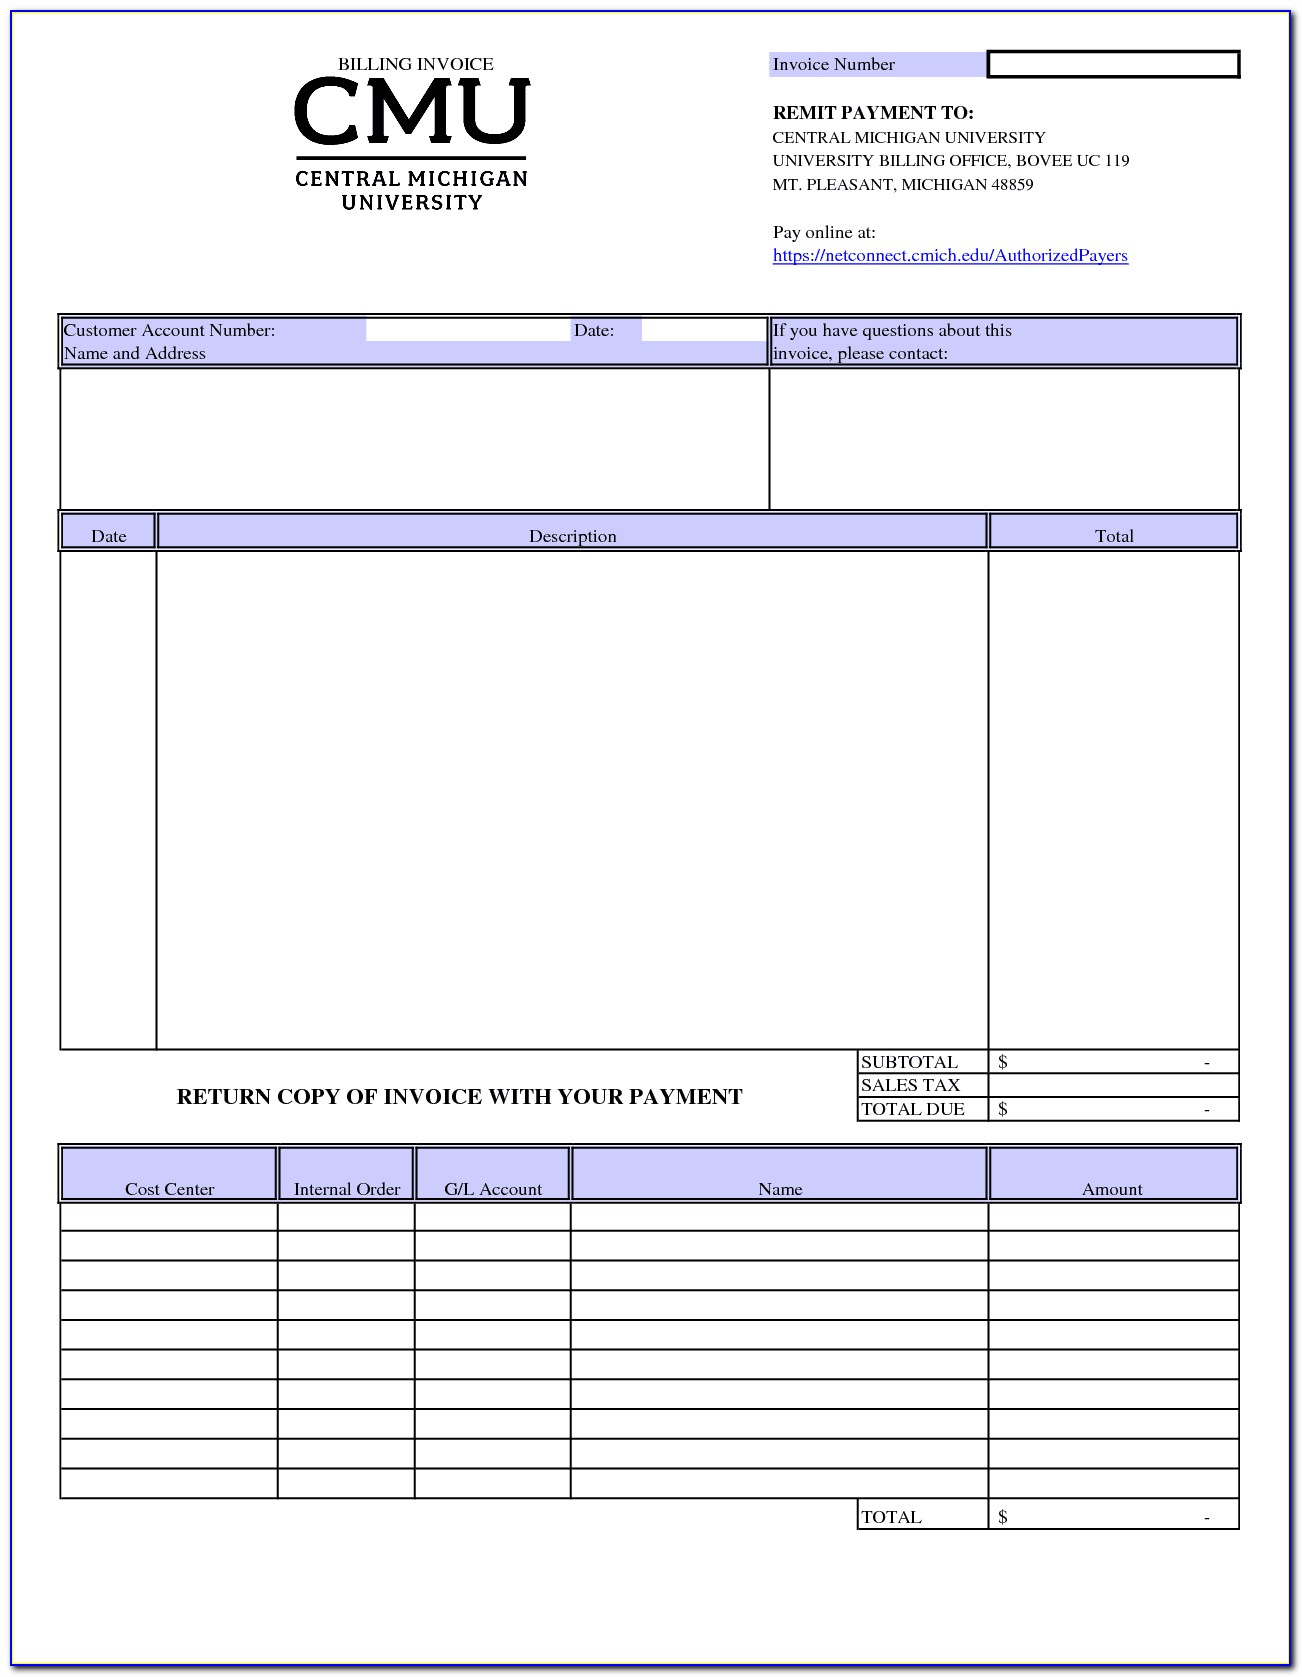 Employee Schedule & Hourly Increment Template For Excel